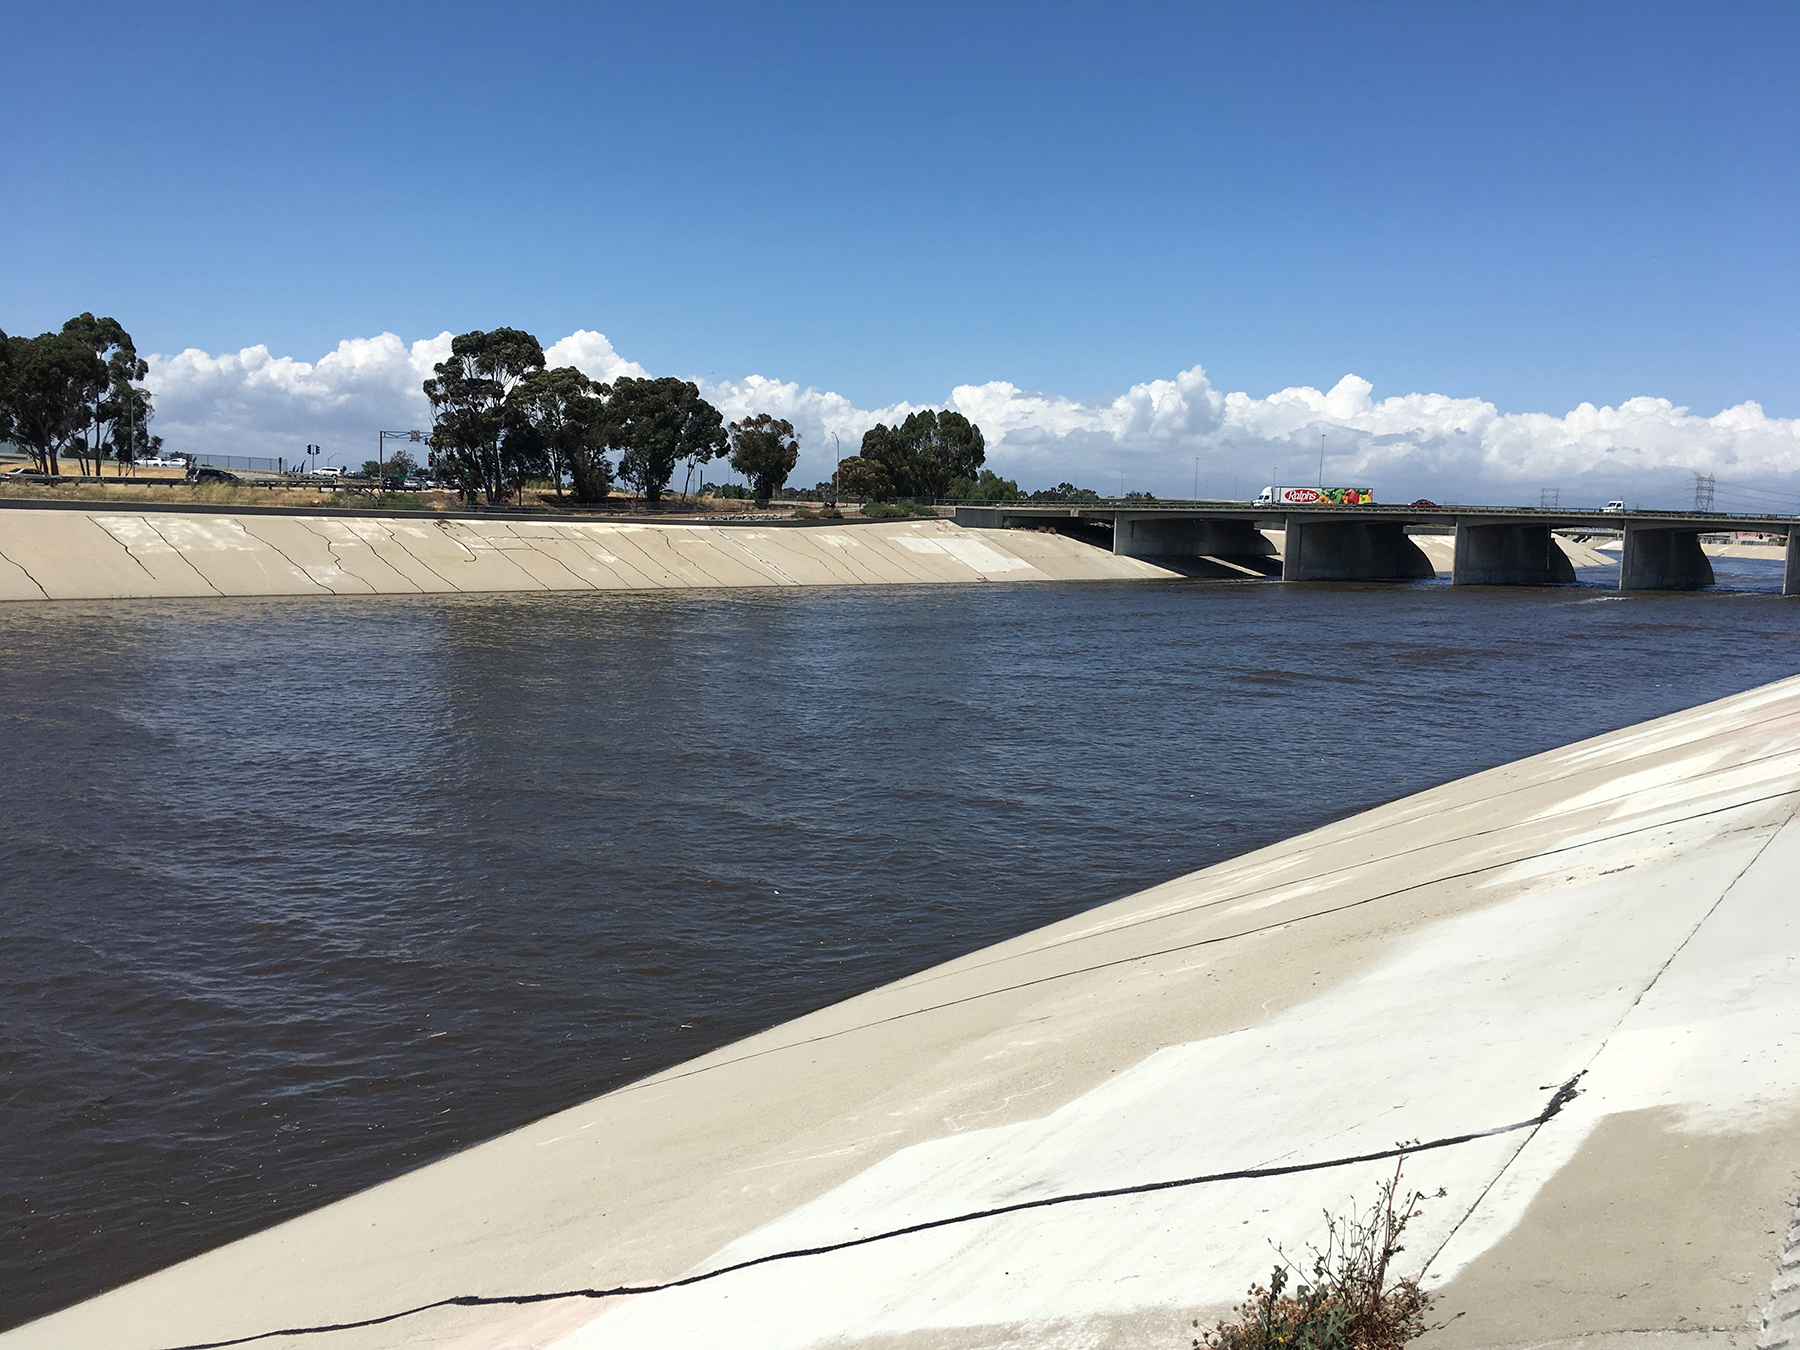 Significant increases in wastewater reuse and dry weather diversions would decrease the volume of treated effluent and untreated runoff entering the Los Angeles River, shown here above its confluence with Compton Creek, raising questions about potential effects on water quantity and quality. (Image courtesy of Jordyn Wolfand)